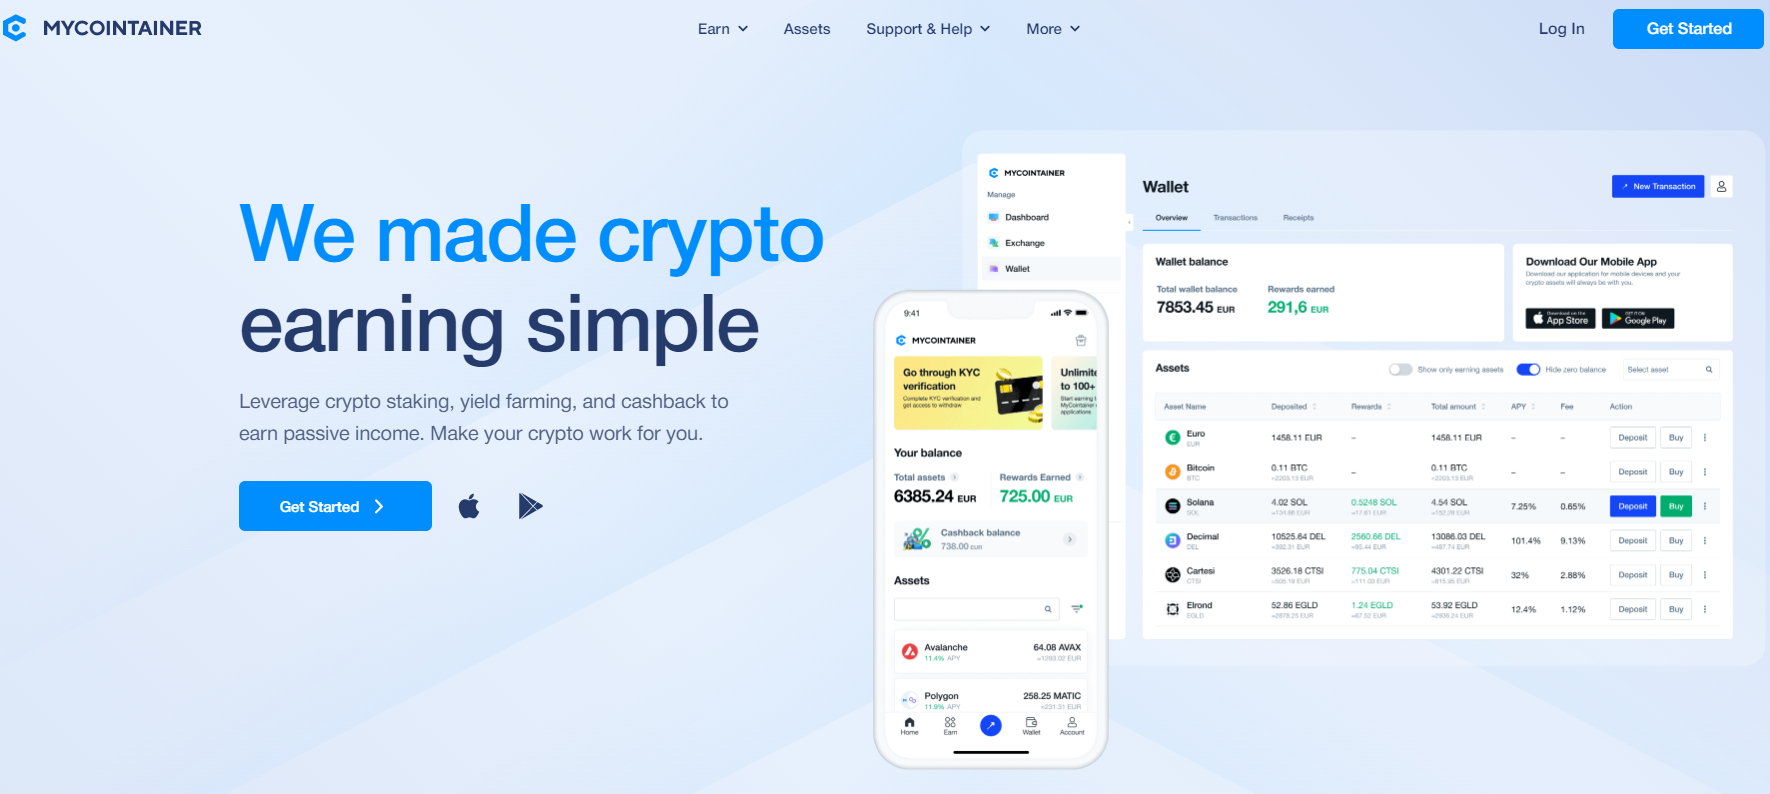 MyCointainer home page